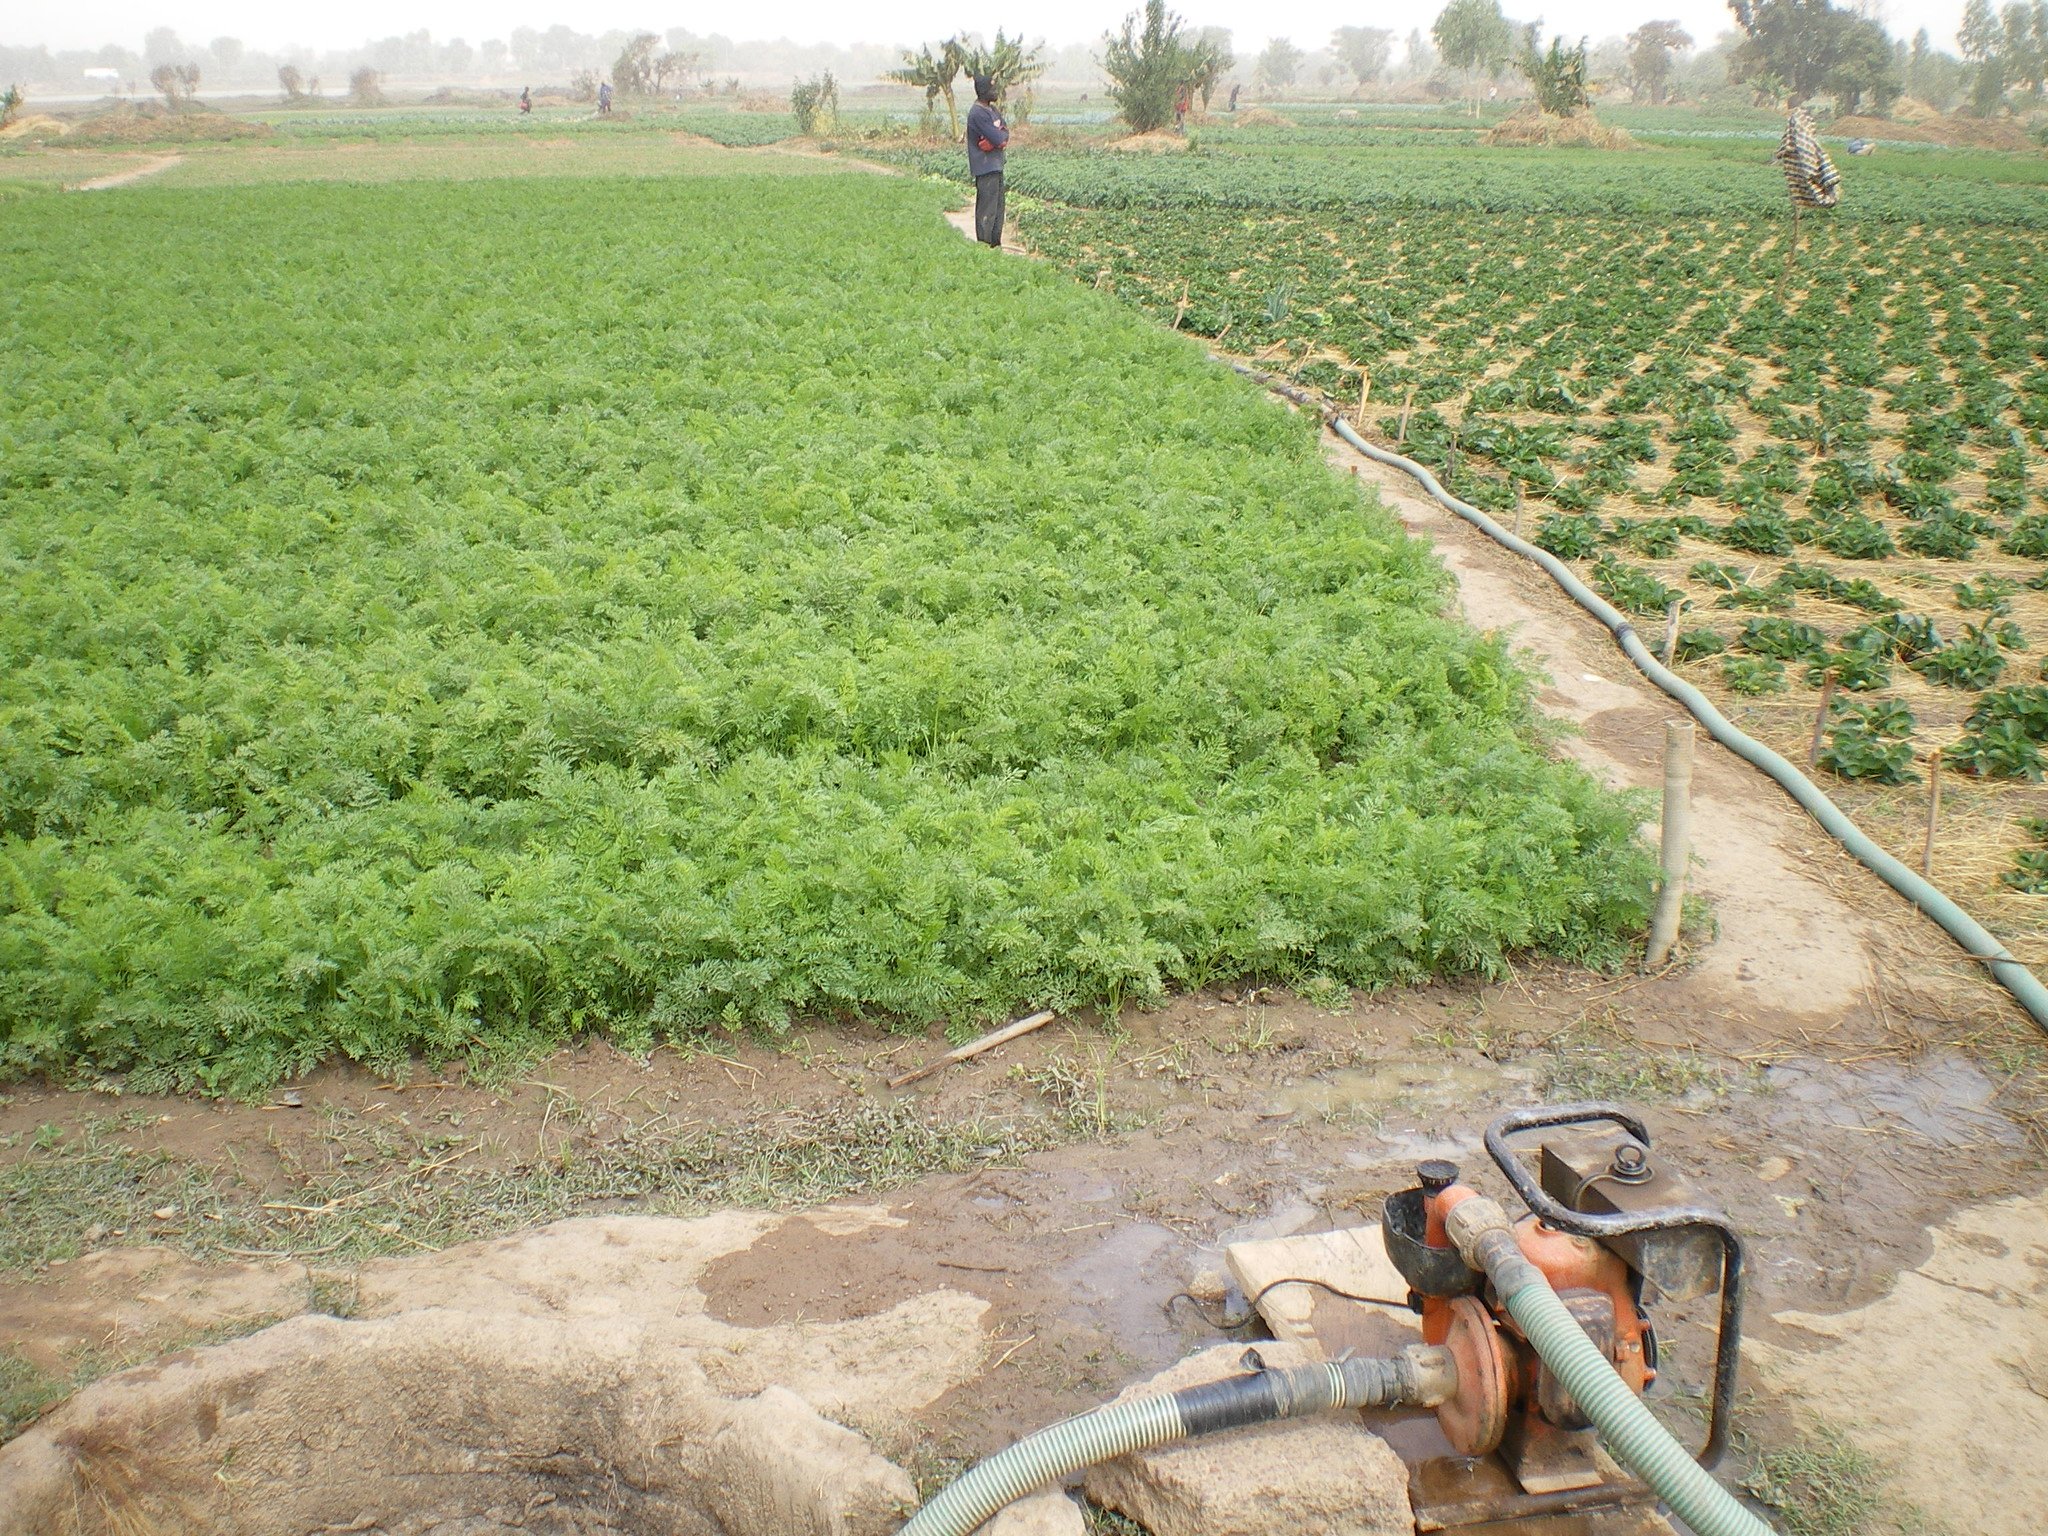 In poorer countries, using raw wastewater to irrigate urban farms could be an underlying cause of antibiotic resistance.